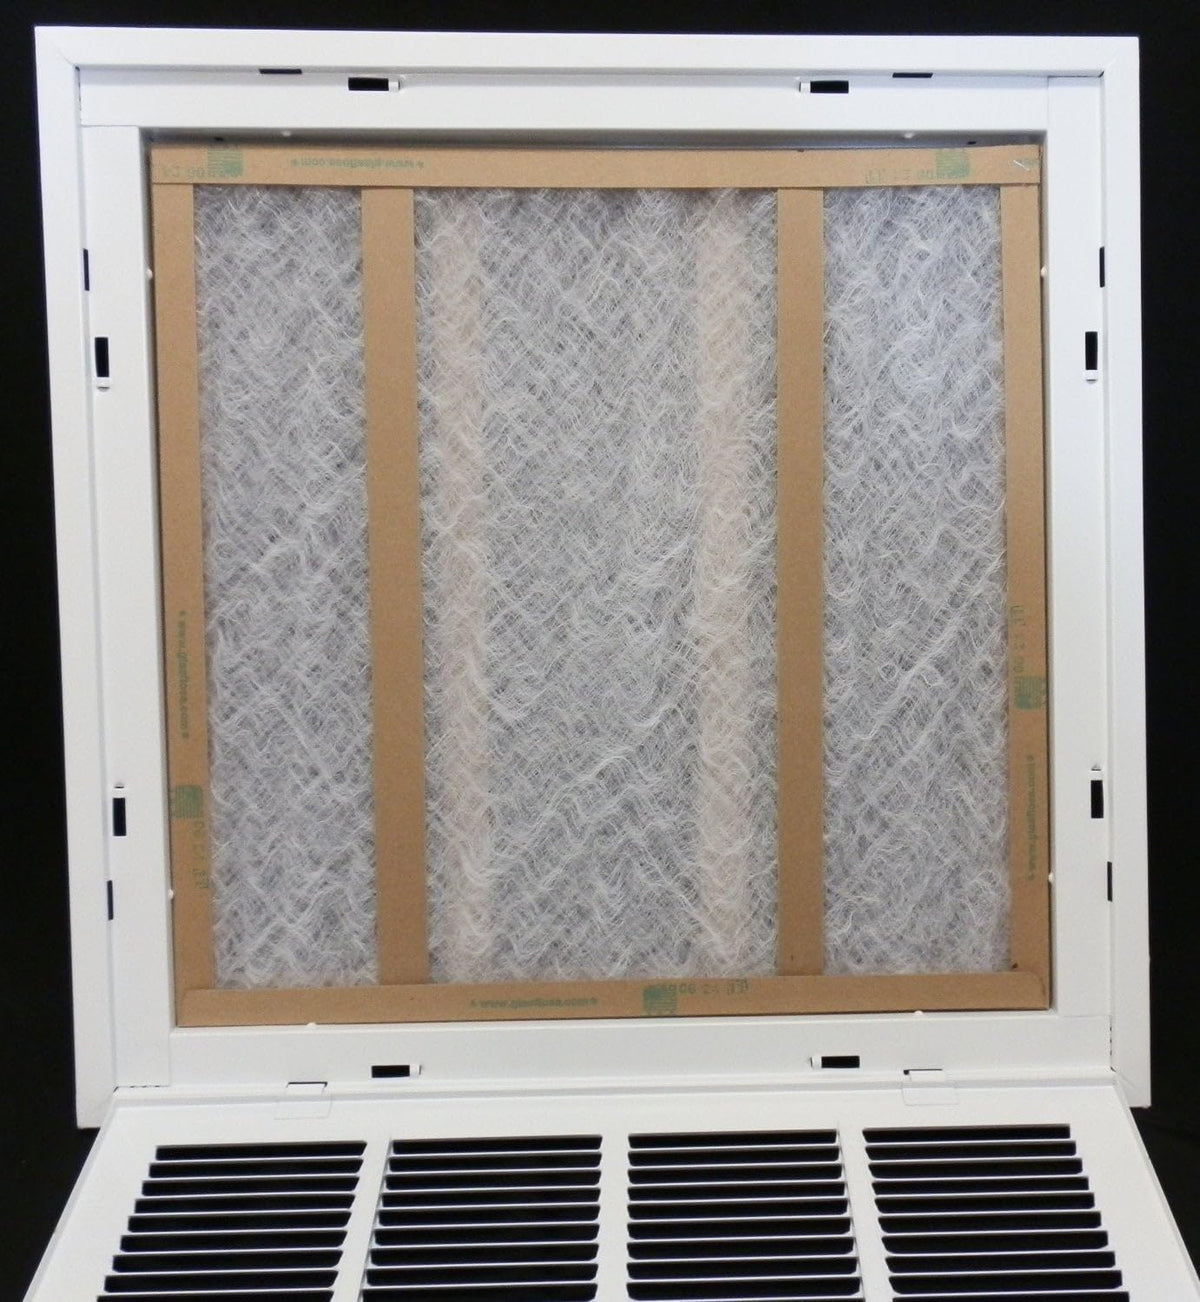 22&quot; X 10&quot; Steel Return Air Filter Grille for 1&quot; Filter - Removable Frame - [Outer Dimensions: 22 5/8&quot; X 12 5/8&quot;]